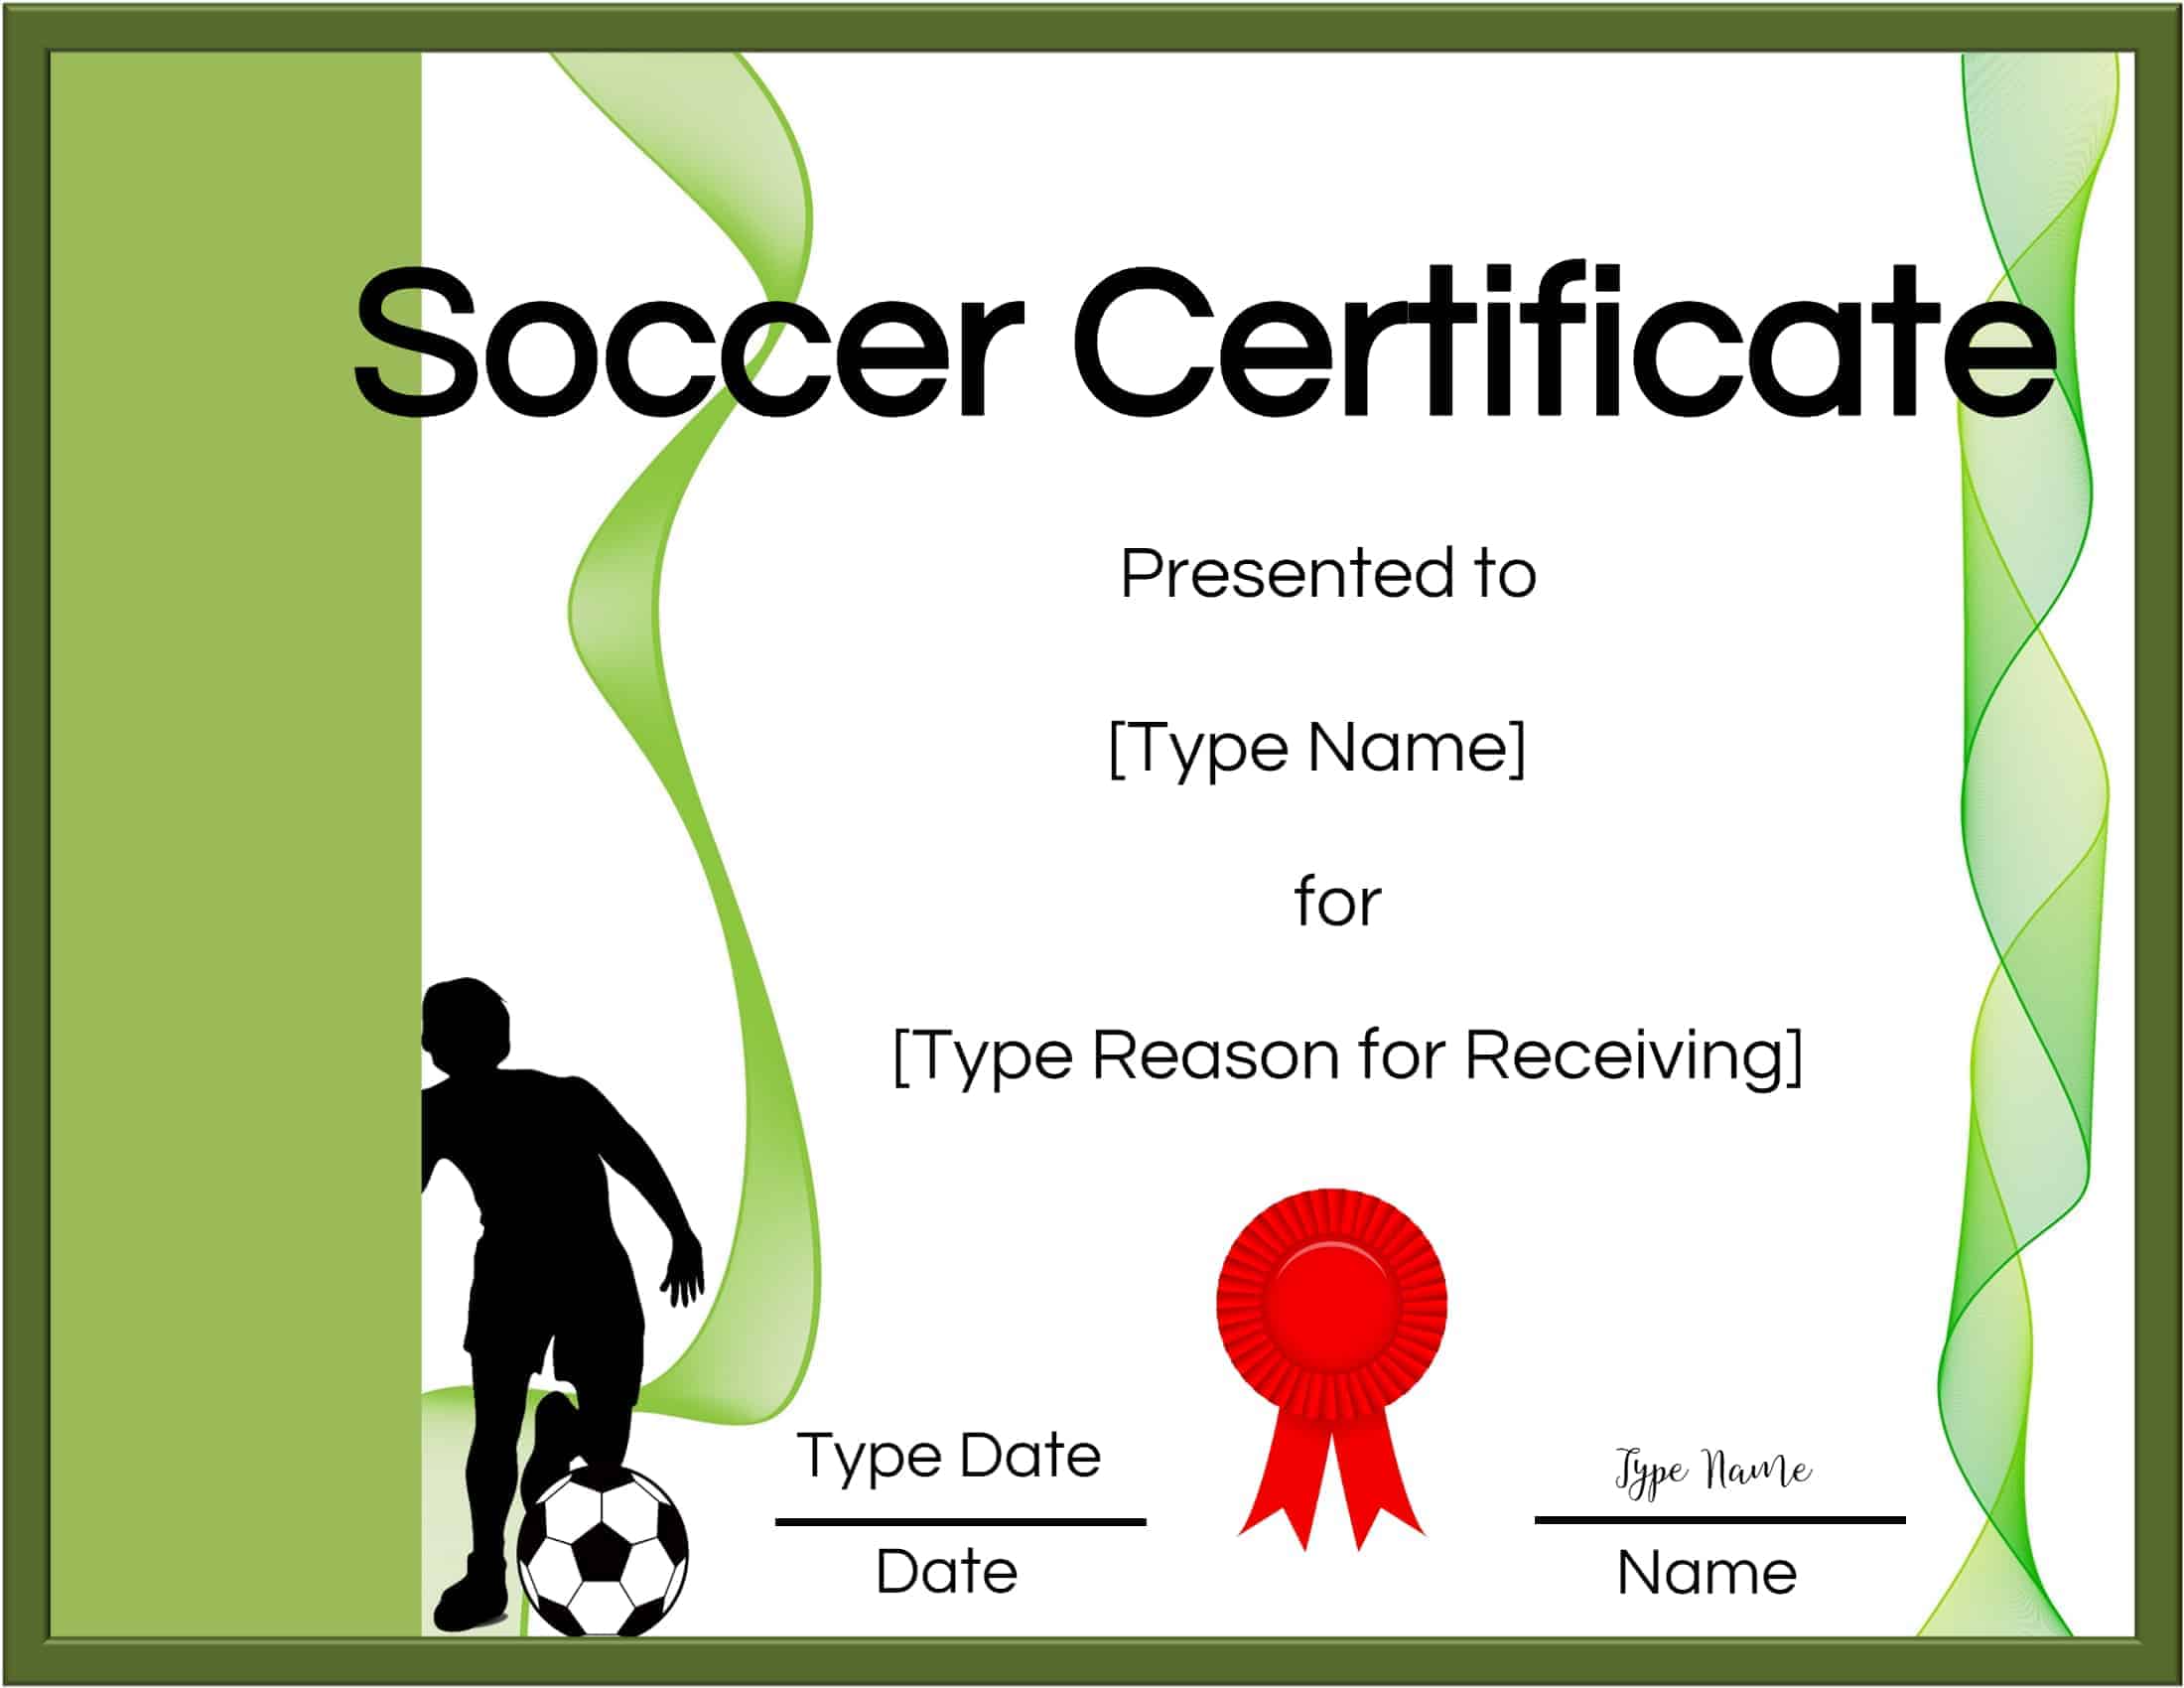 Free Soccer Certificate Maker Edit Online and Print at Home